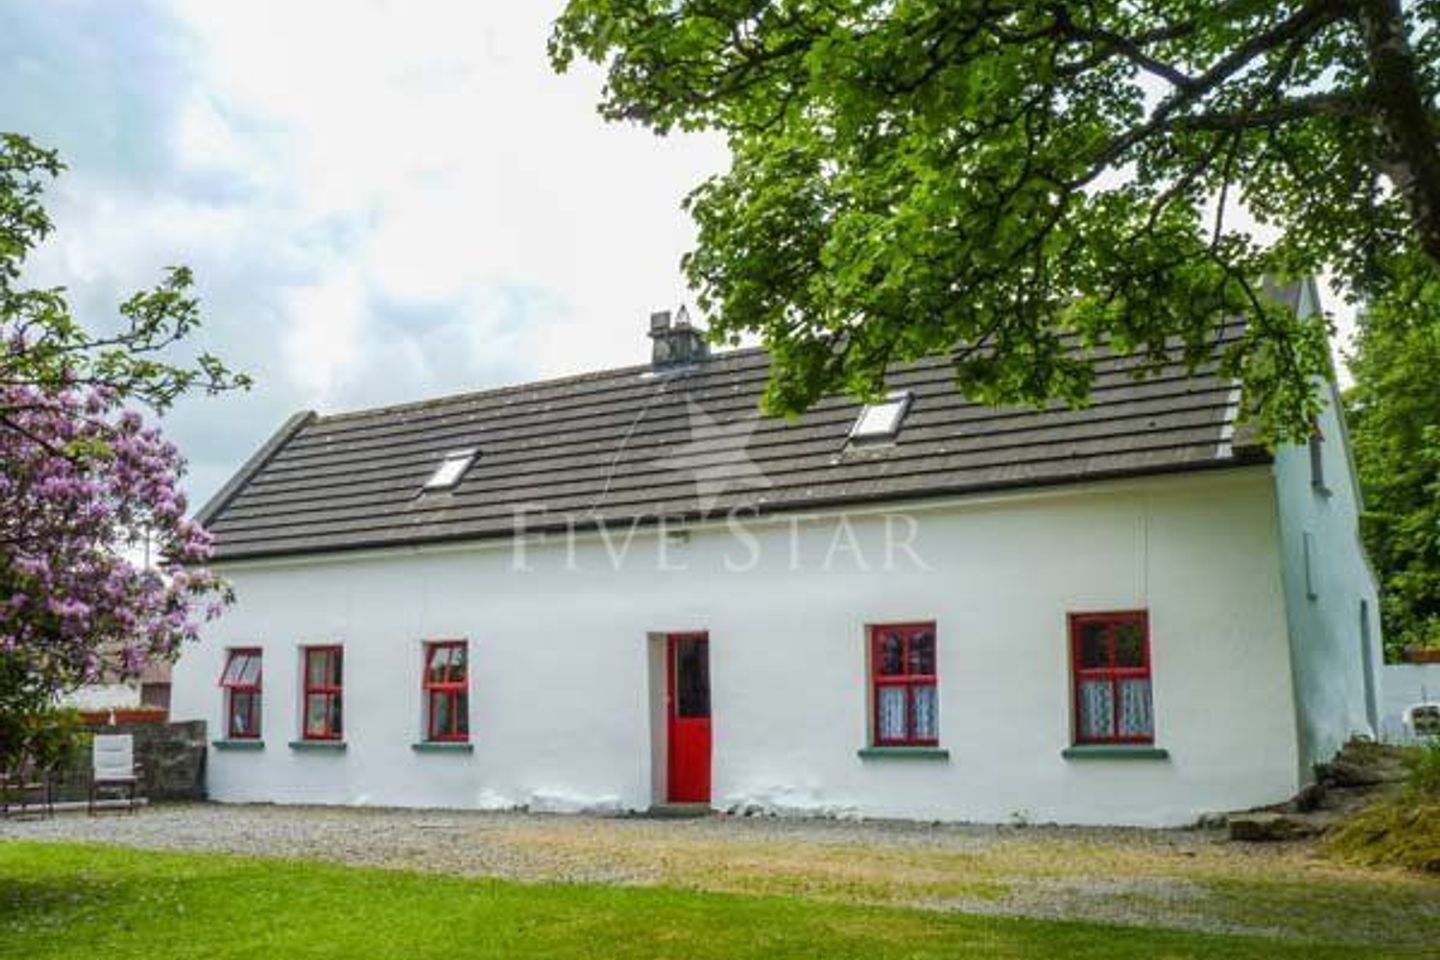 Lough Graney Cottage, Caher, Feakle, Flagmount, Co. Clare